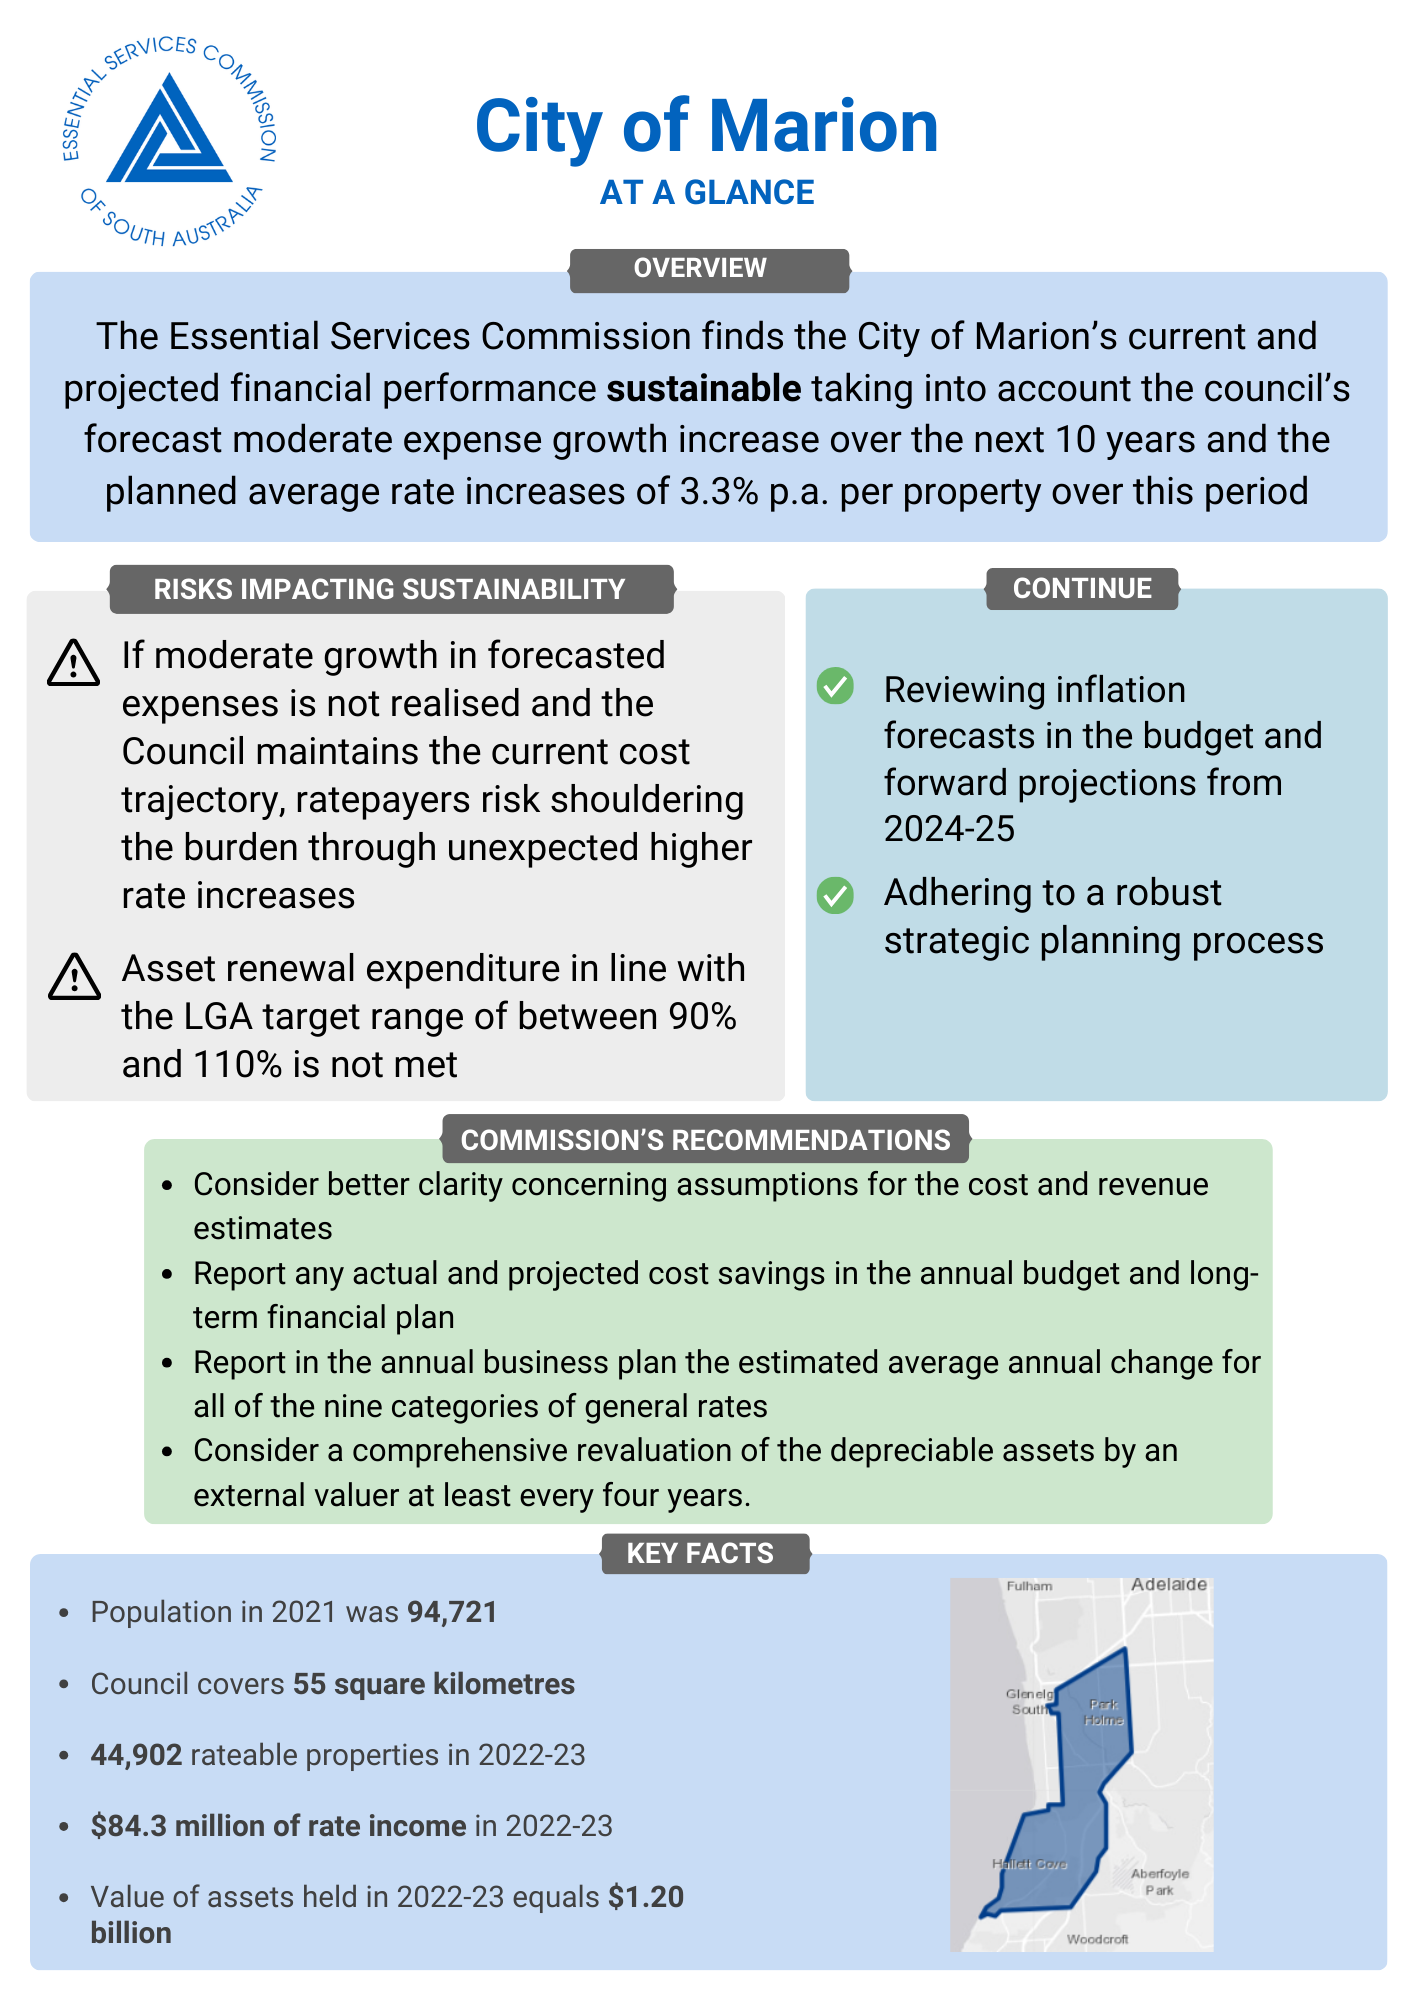 Local government advice 2023-24 - City of Marion - At a Glance image